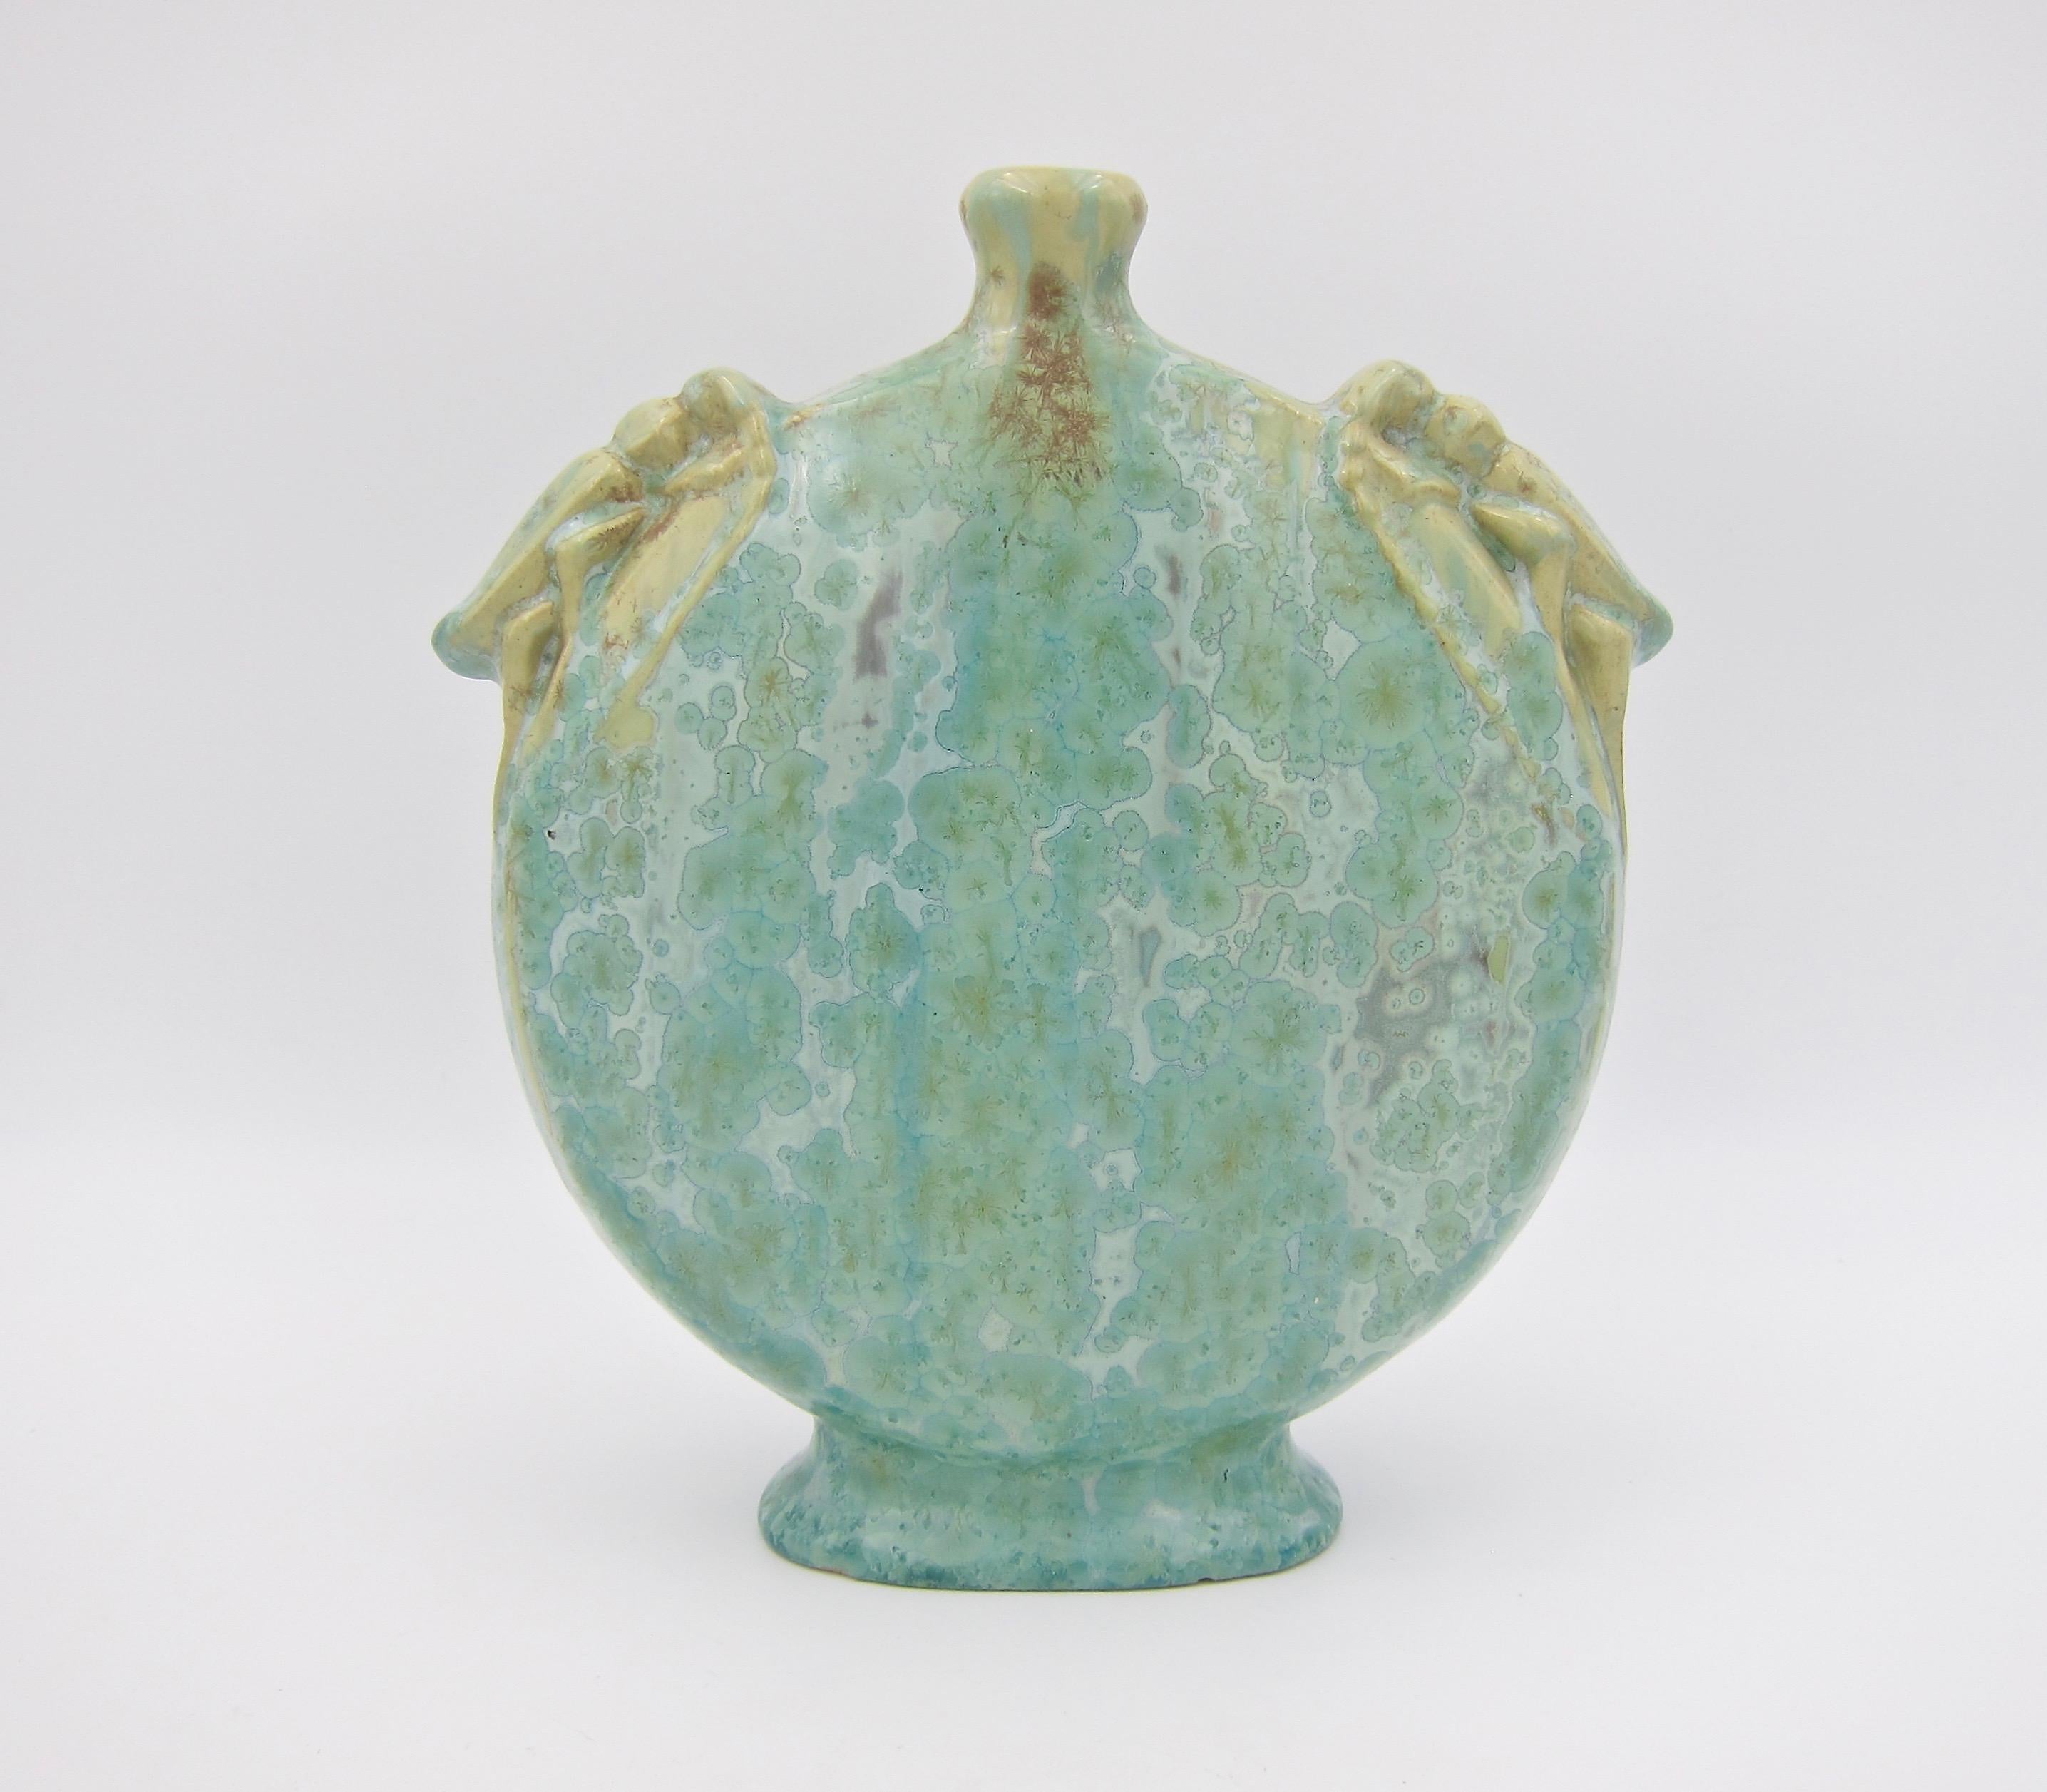 A superb turn of the 20th century art pottery vase from Pierrefonds Pottery of France, dating circa 1905. The antique stoneware vessel features Art Nouveau style cicadas perched on top of either shoulder and a sophisticated green crystalline glaze